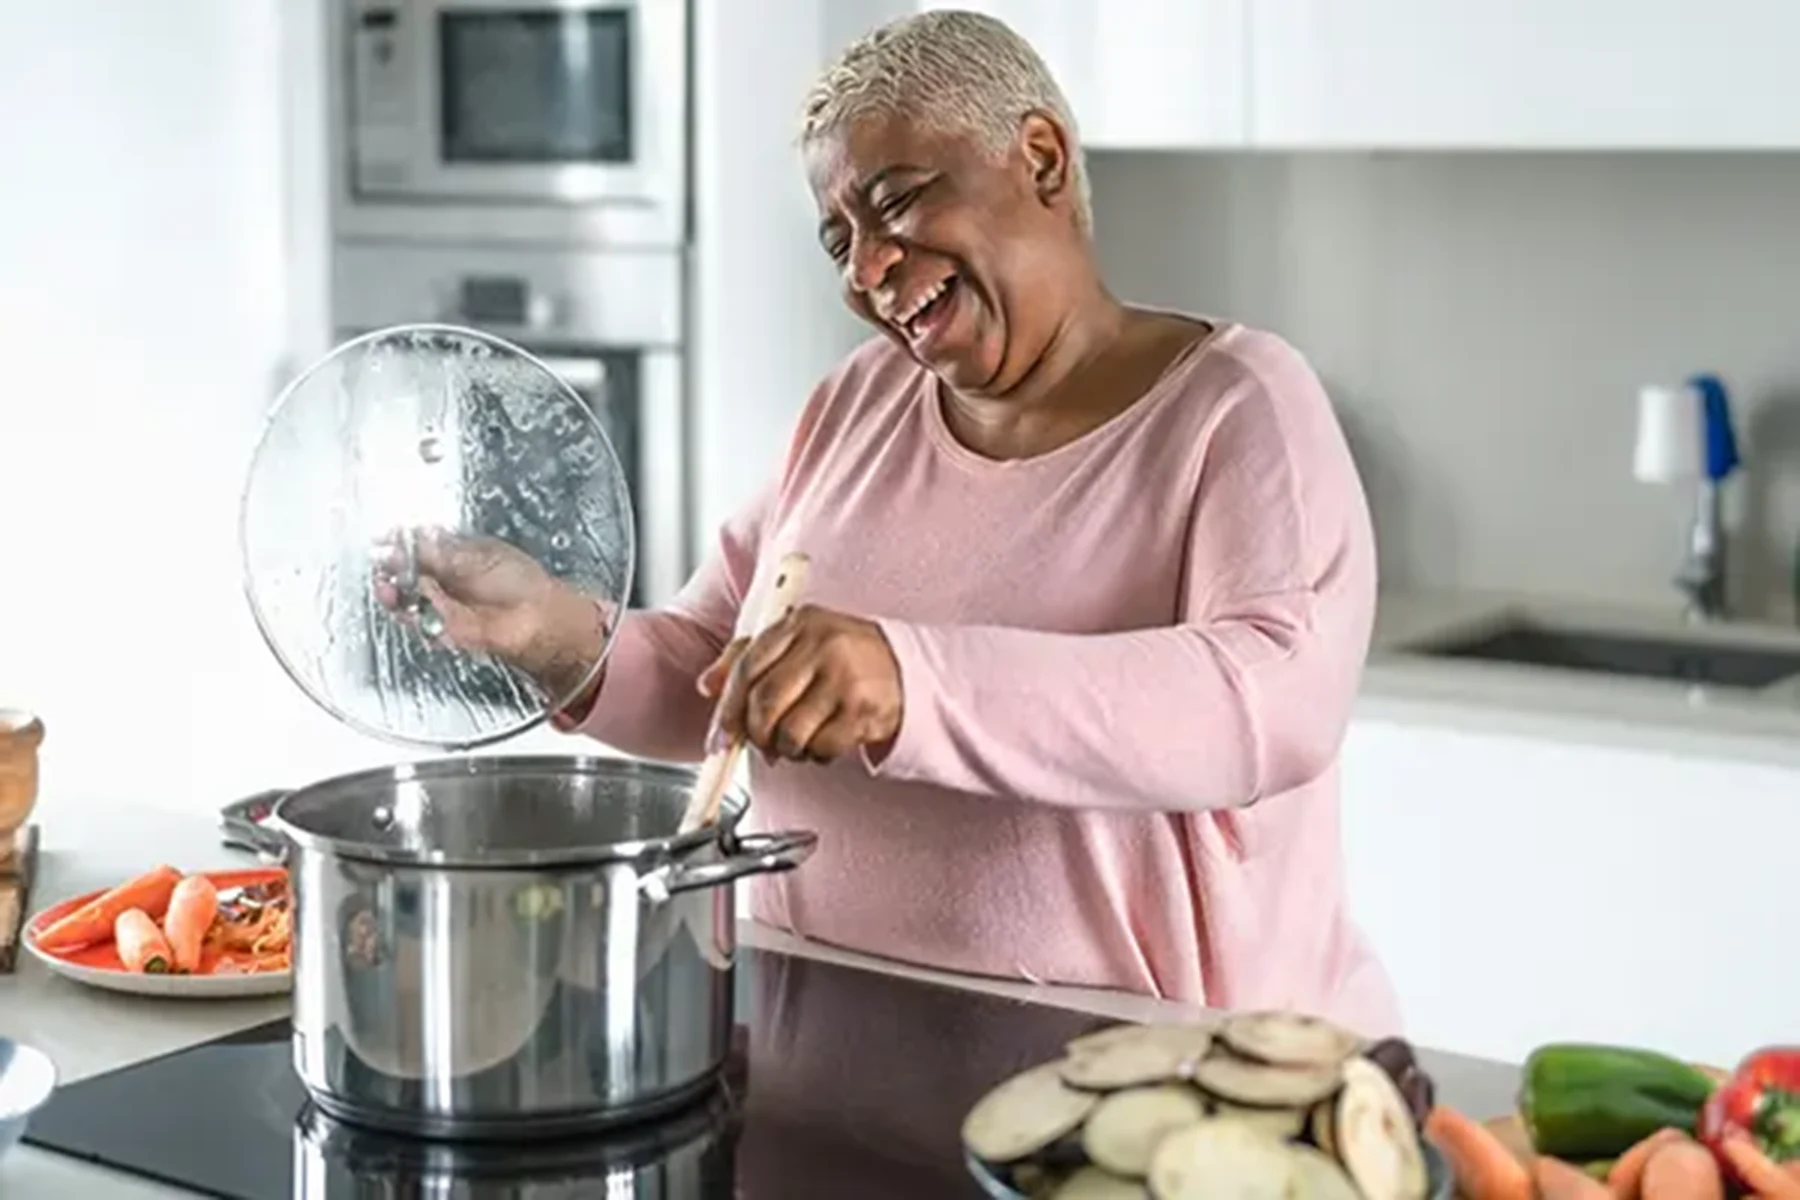 A woman stands at her stove with a pot and mixes, while smiling.